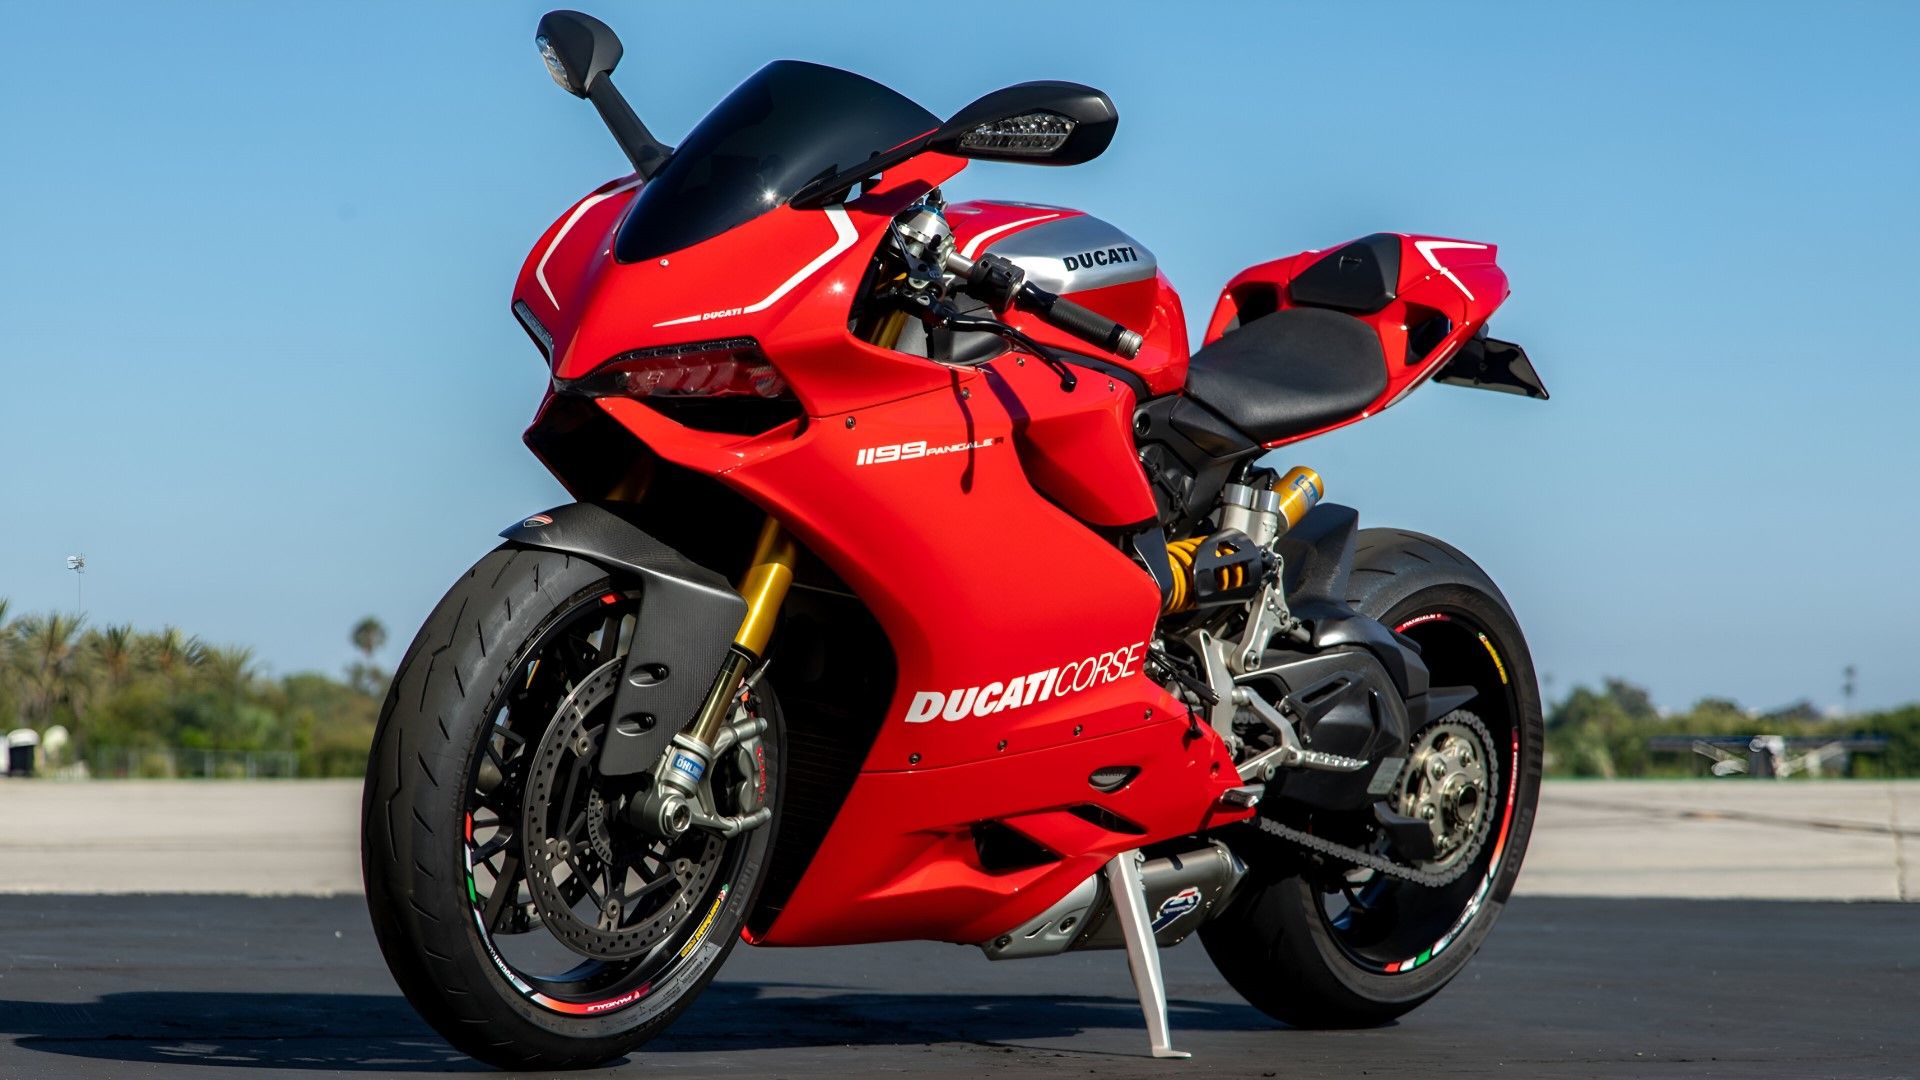 2013 Ducati 1199 Panigale R front third quarter view